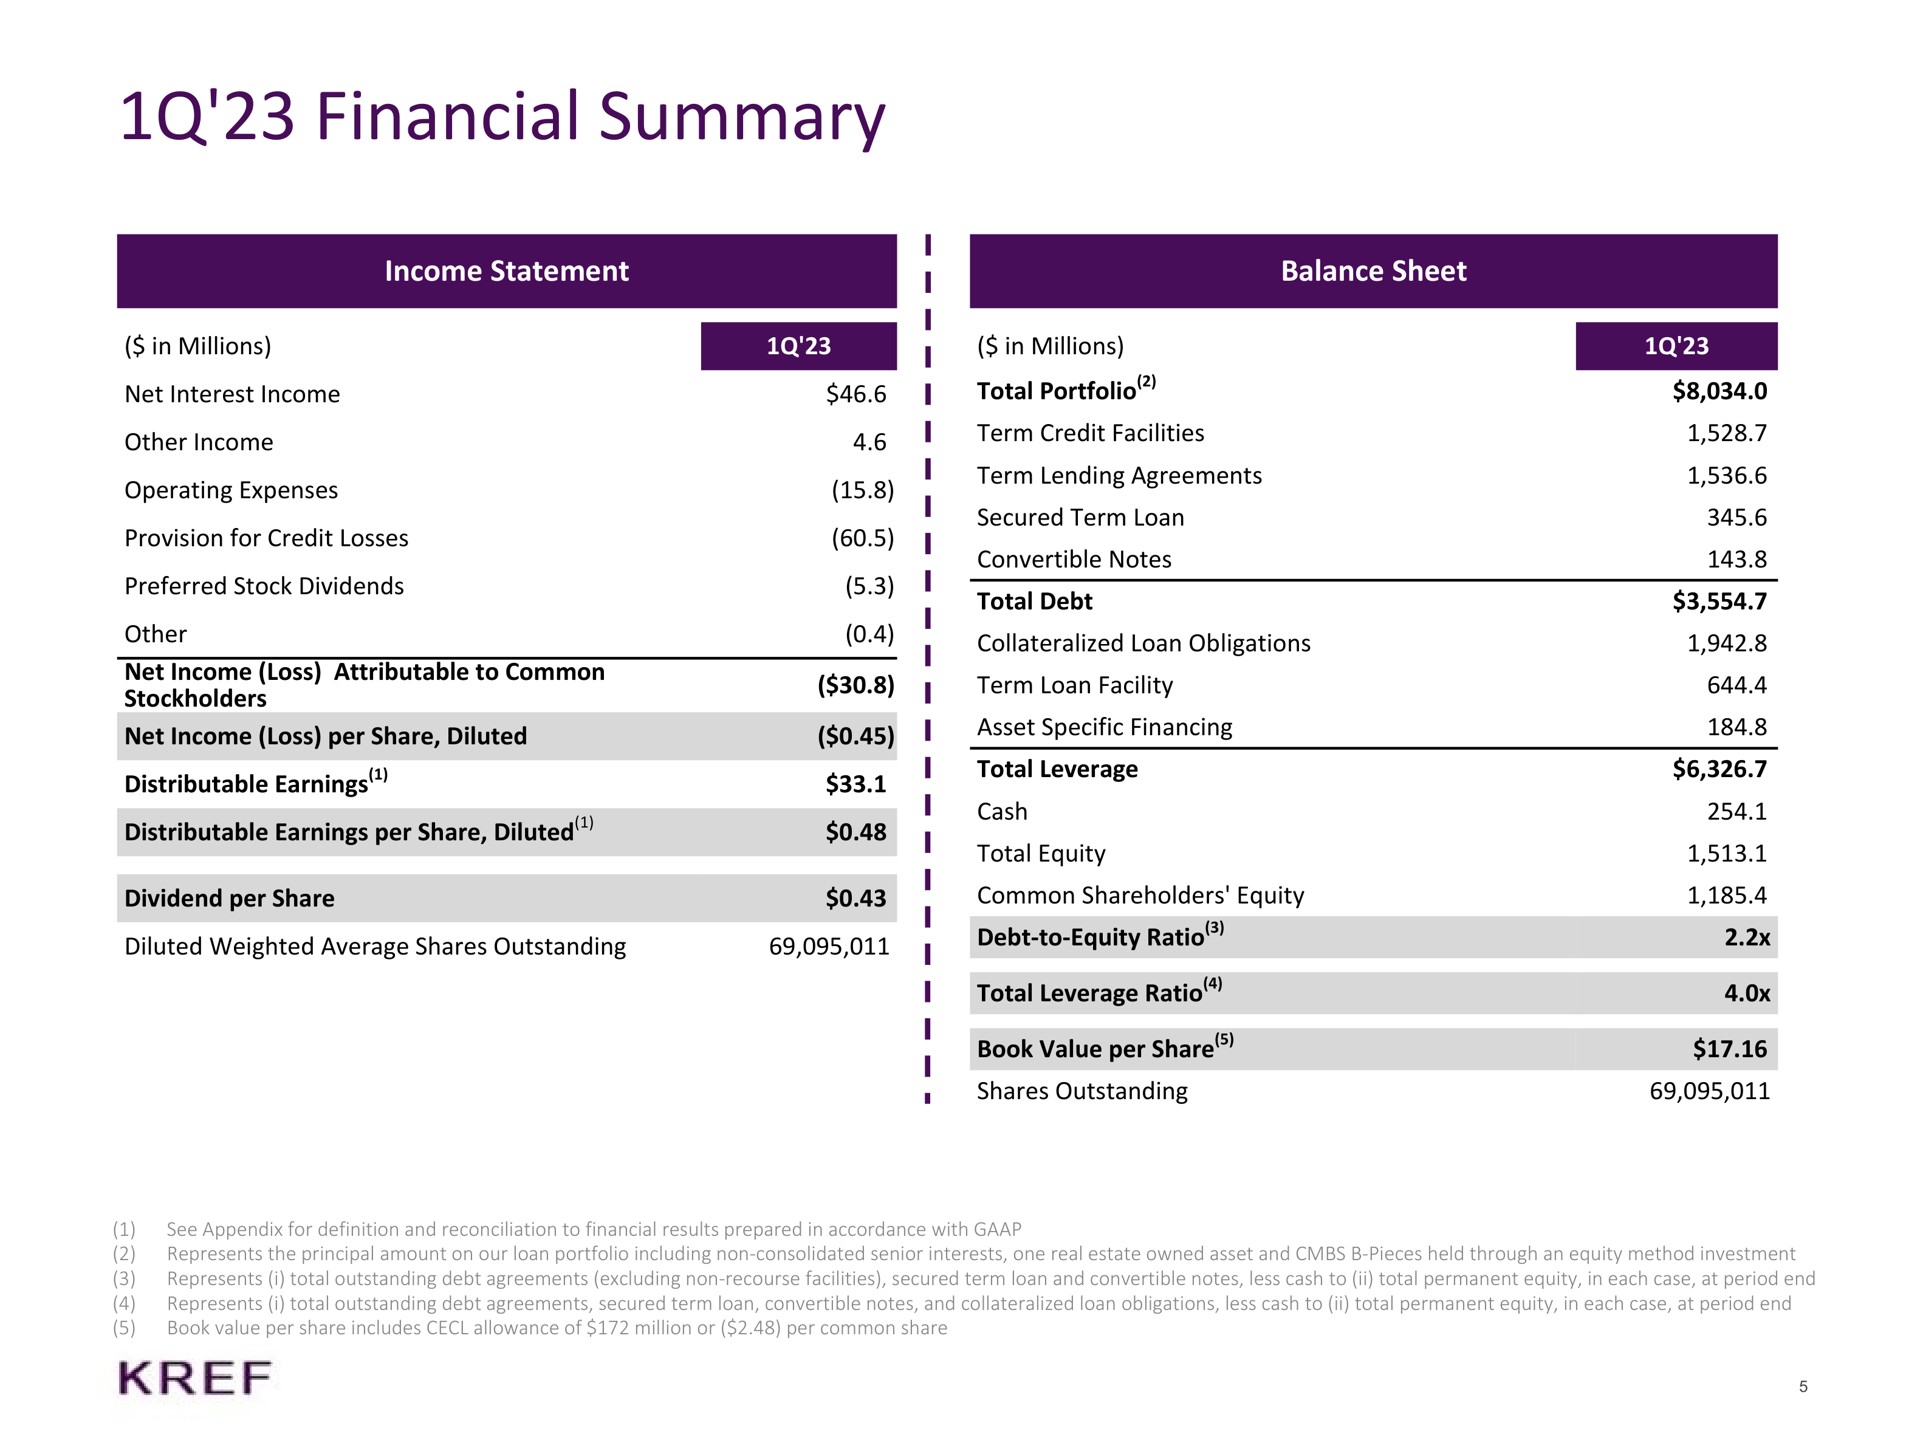 financial summary income statement balance sheet i cash total equity | KKR Real Estate Finance Trust